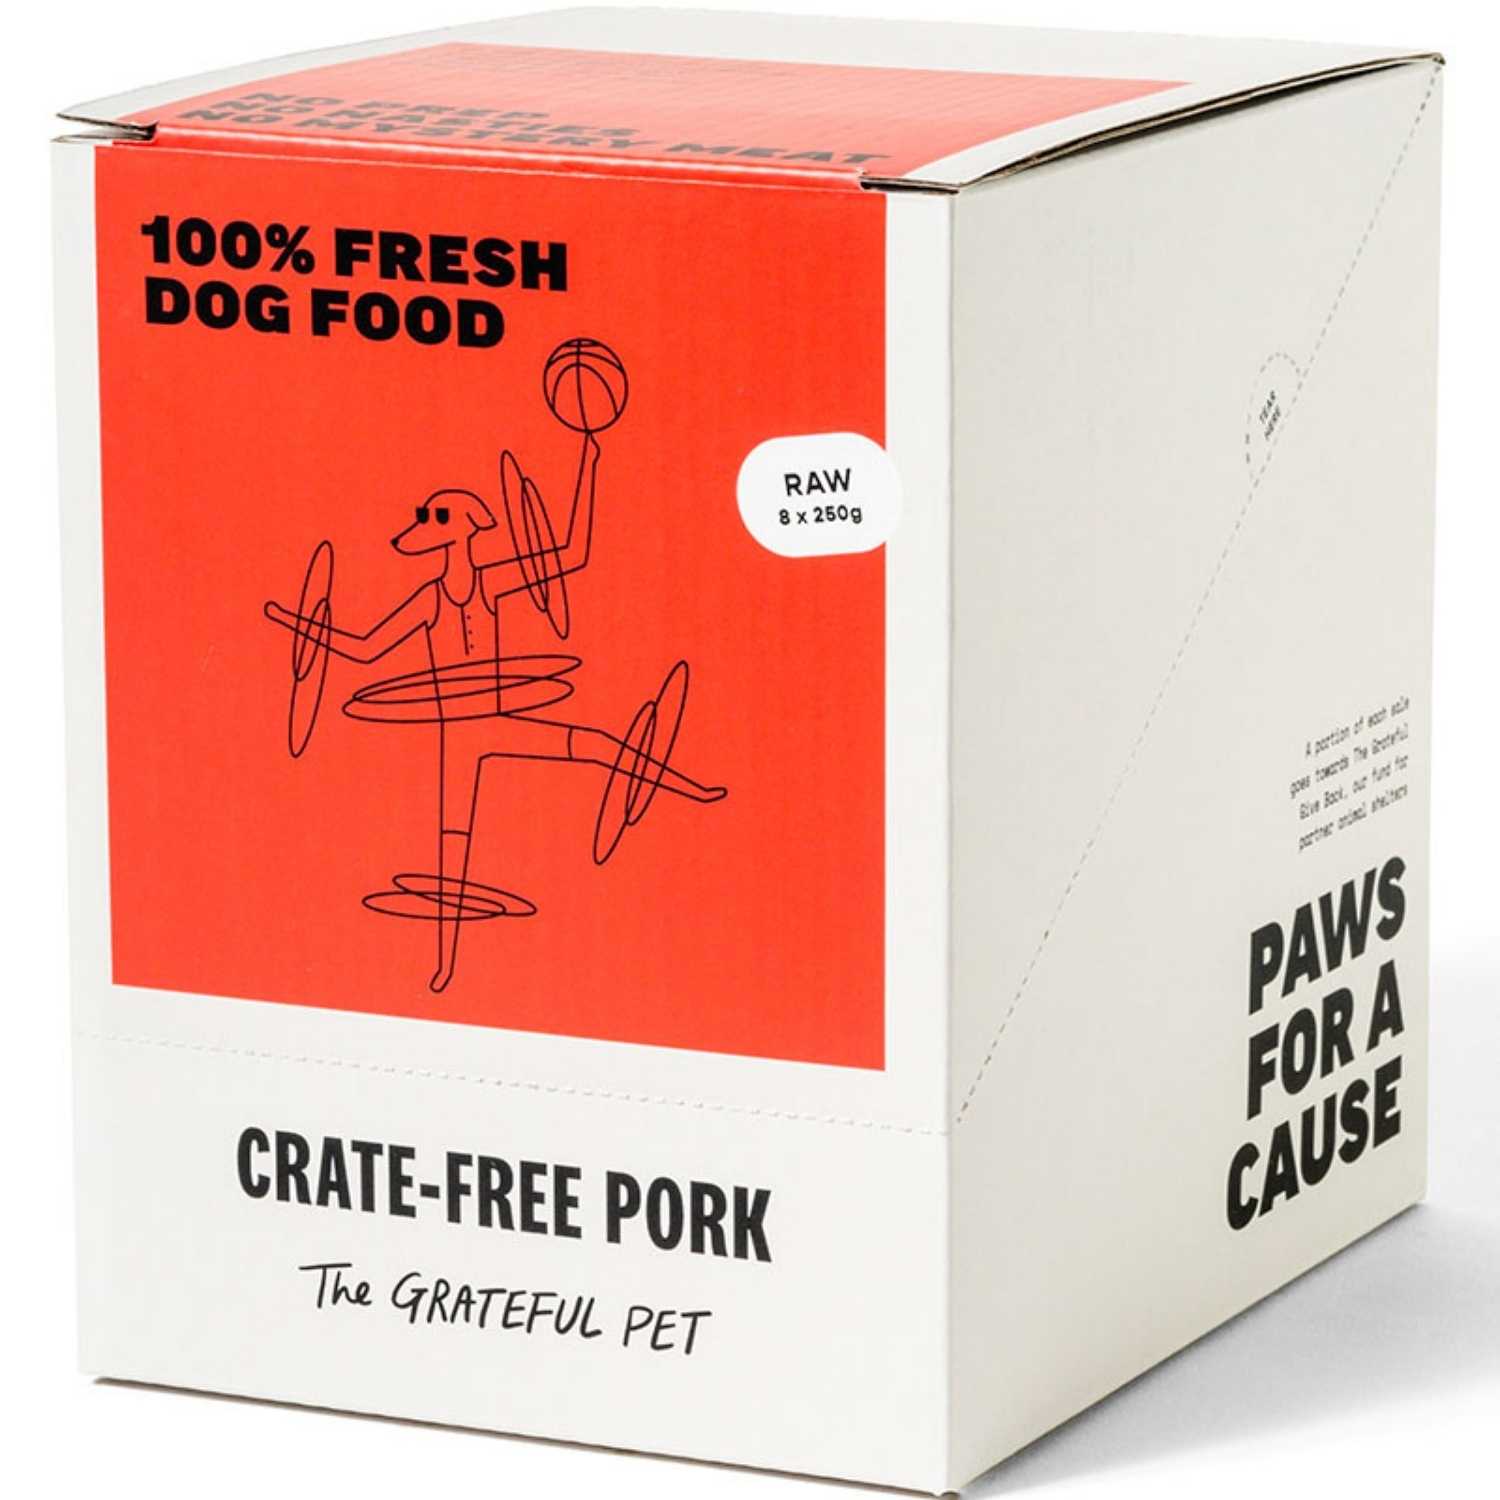 The Grateful Pet - Raw (Crate-Free Pork) - Dog (8 x 250g Pouch) Food (Case)